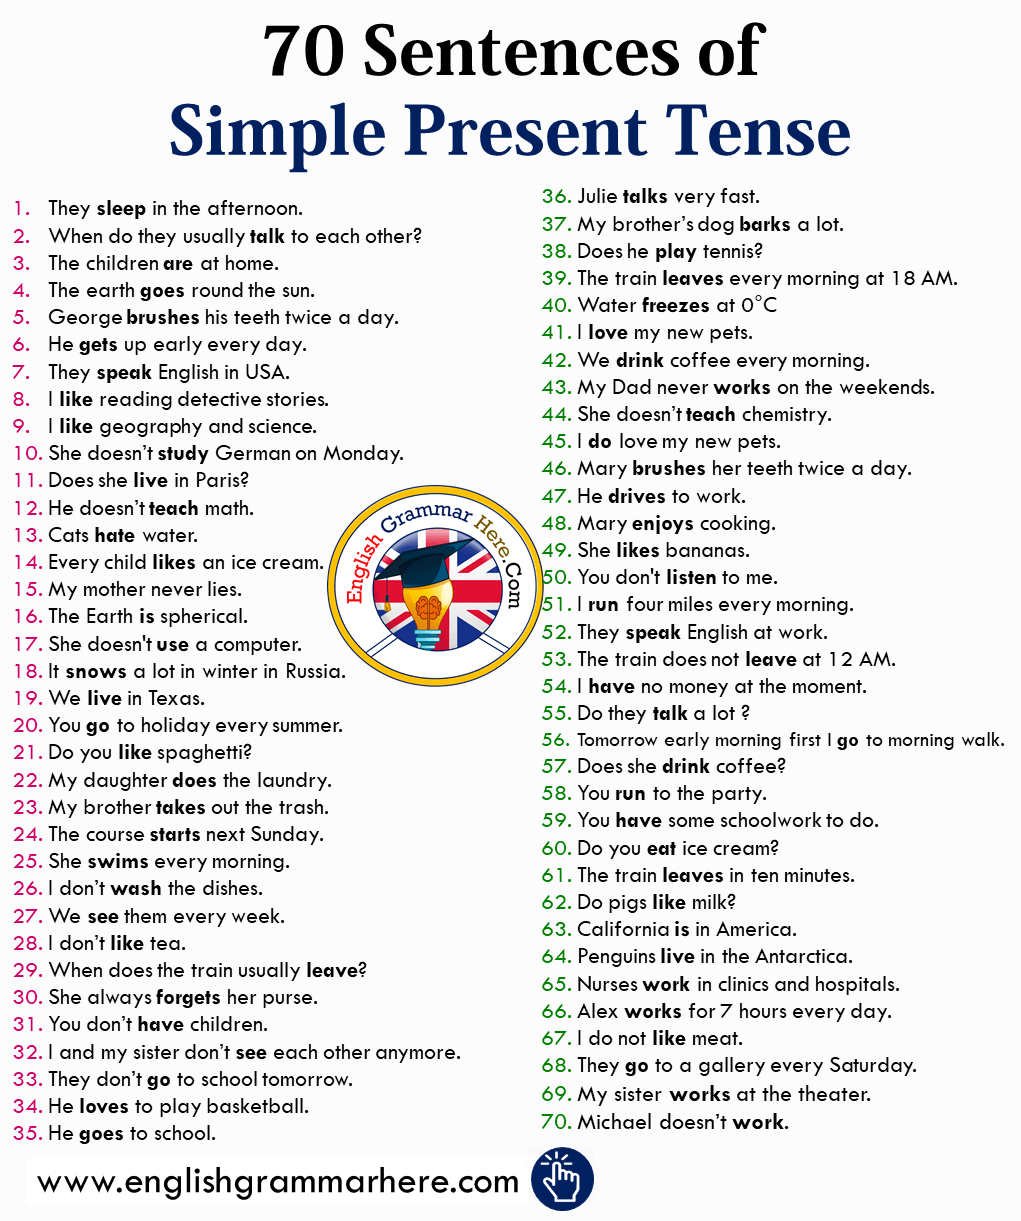 70 Sentences of Simple Present Tense in English